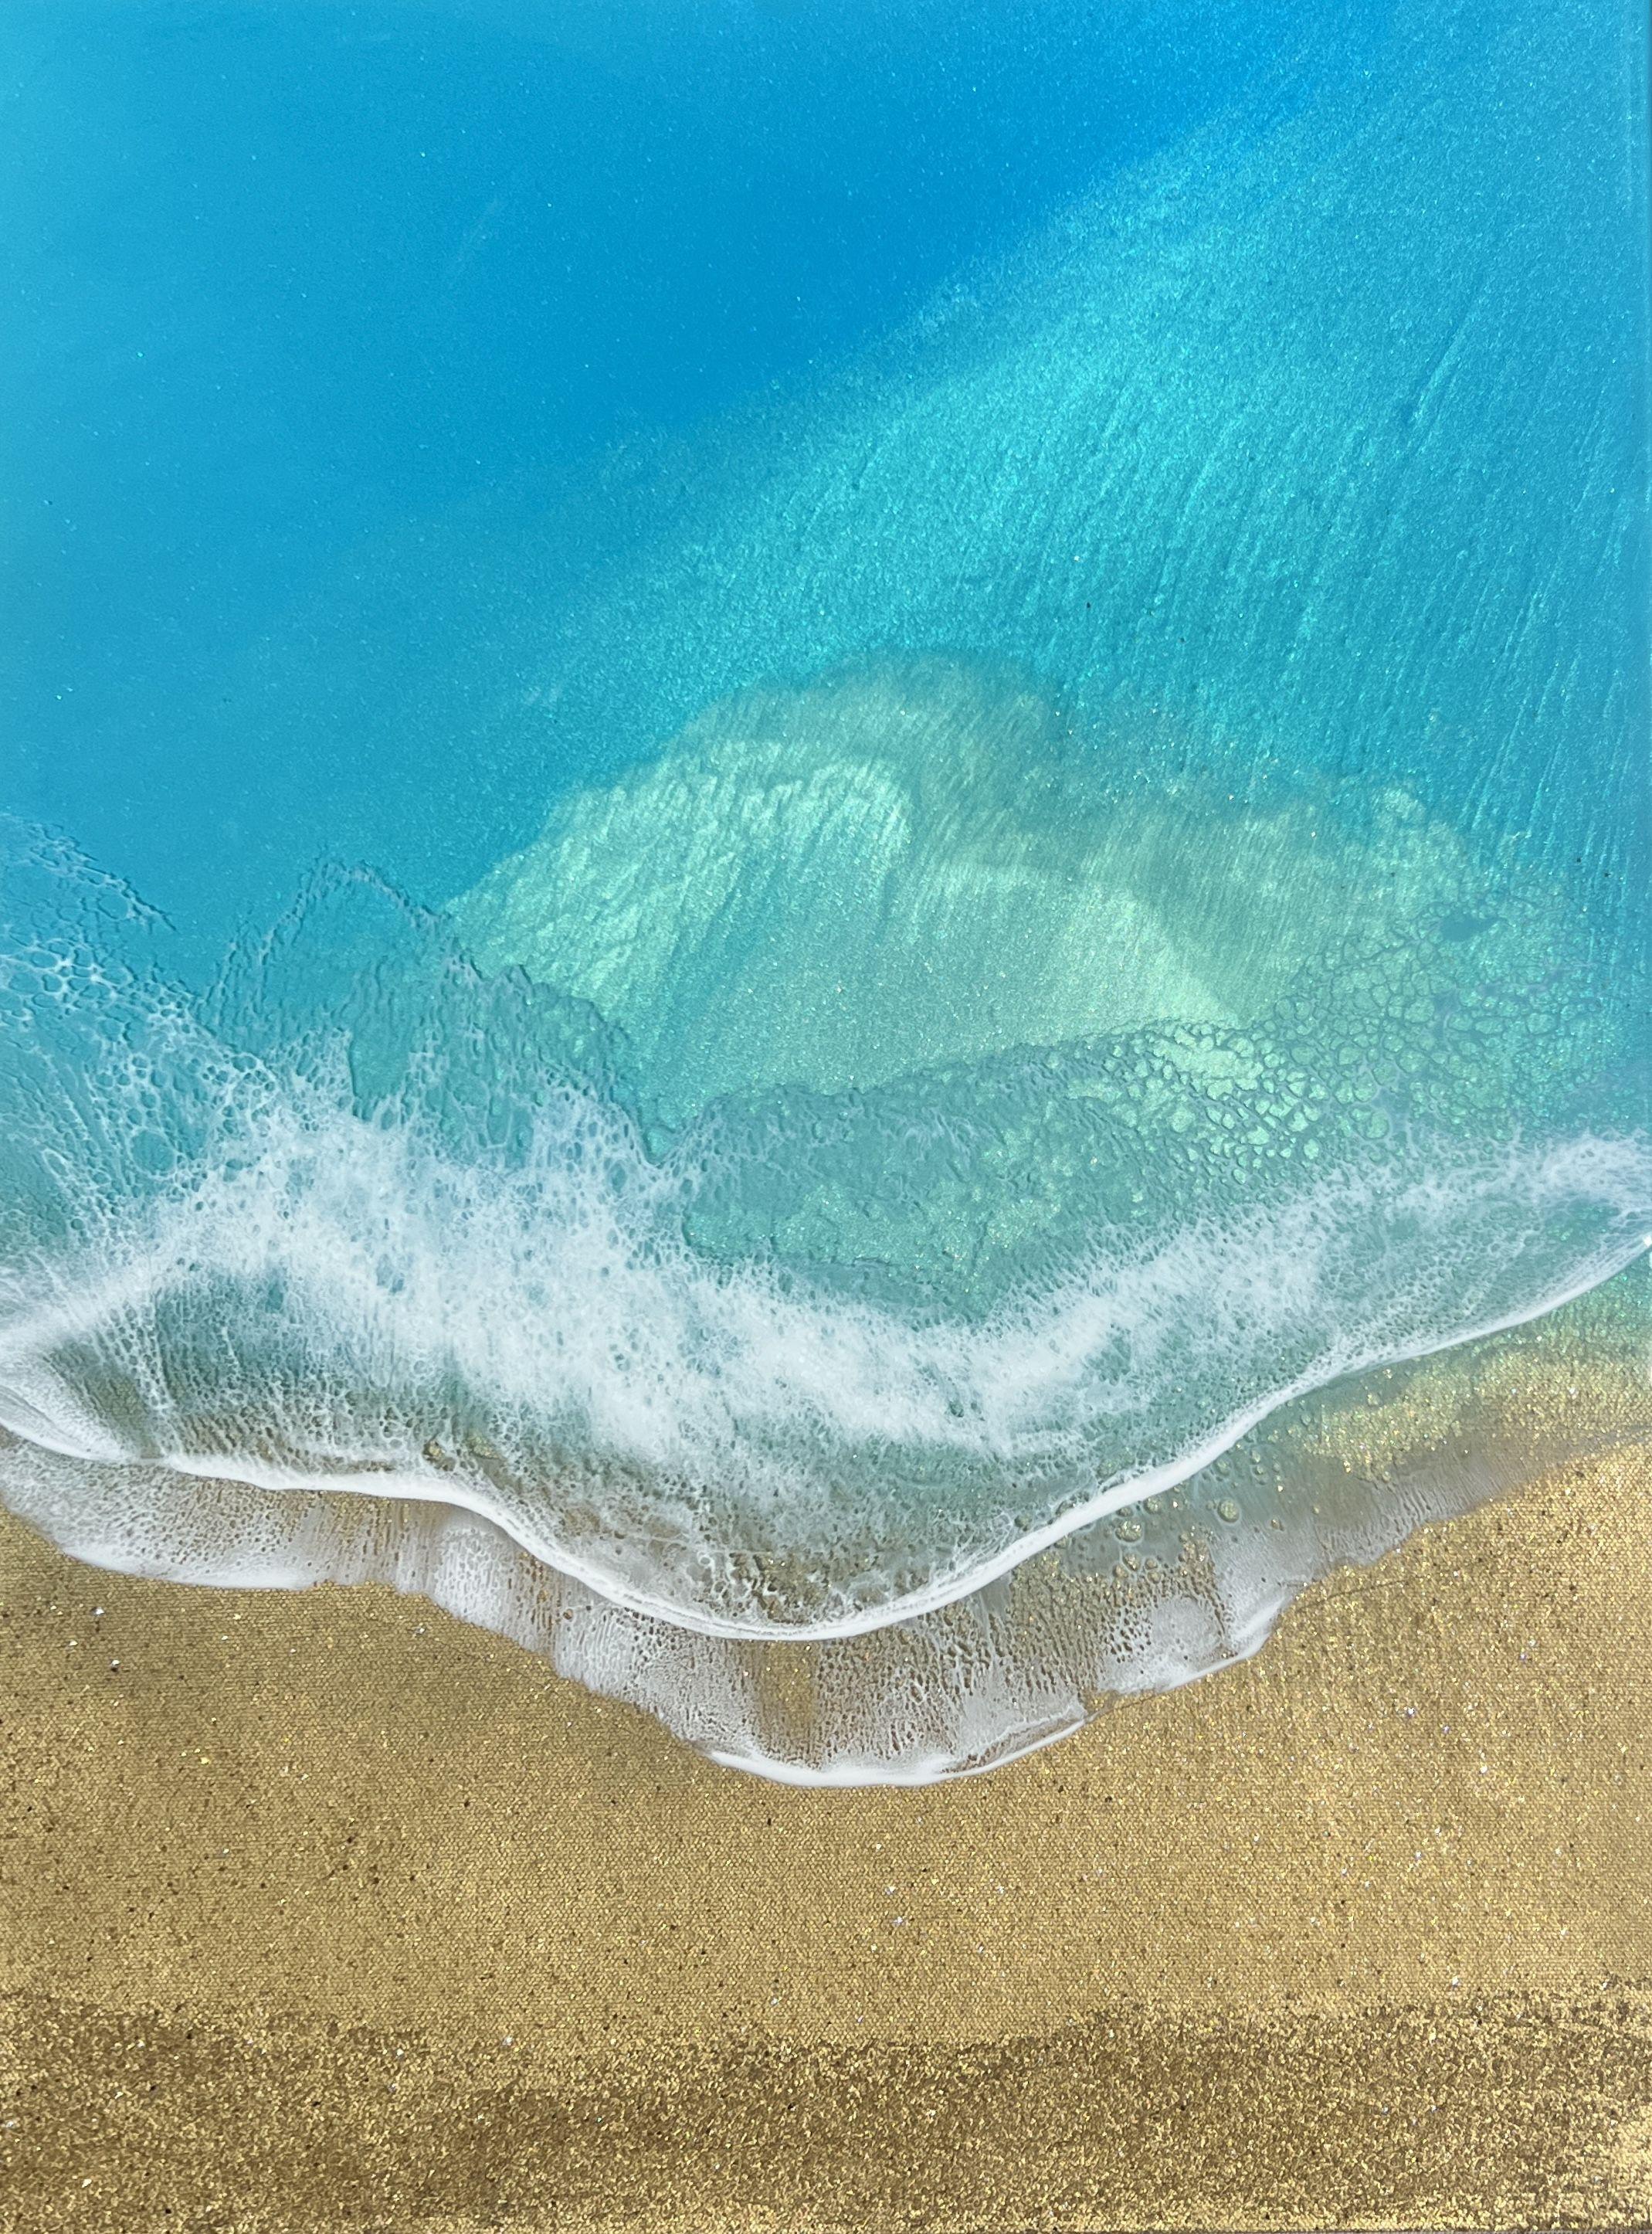 Unique ocean and beach paintings with gold sand and frothy splashing waves, inspired by the Turks And Caicos Islands  Ocean Seascape Painting with gold sand beach and frothy white splashing waves  Different shades of blue, turquoise, teal, aqua,